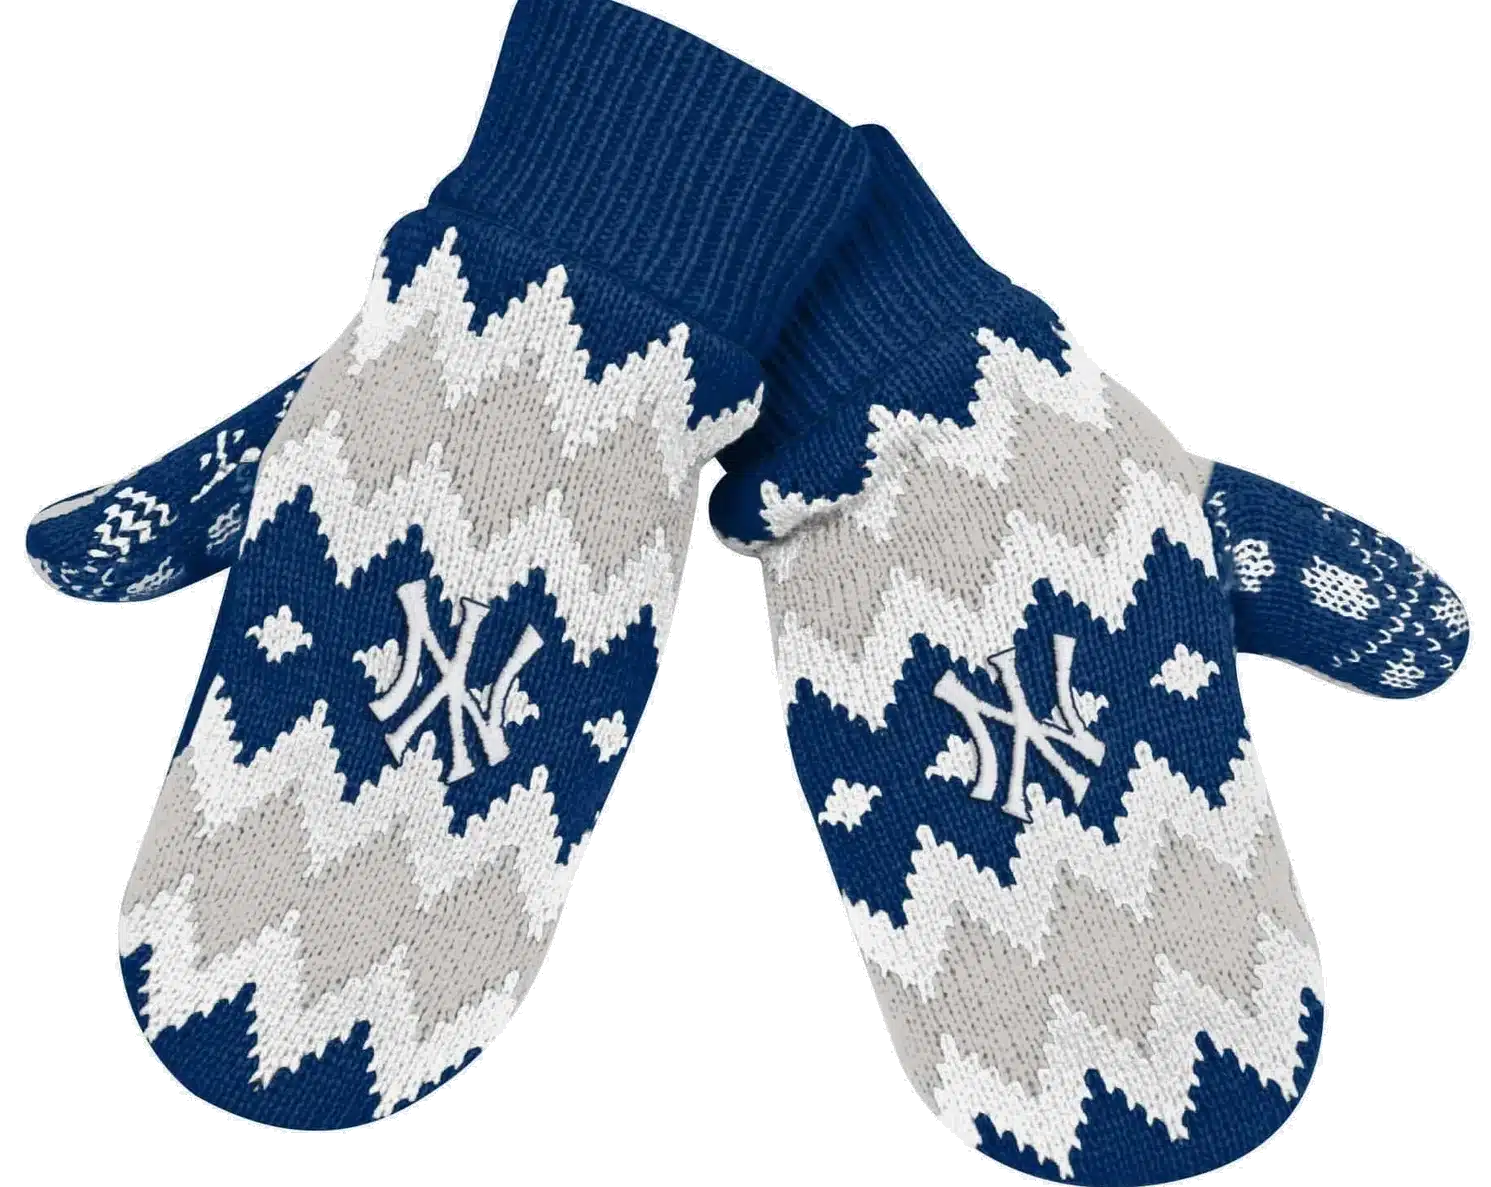 Get Your Hands In The Game With The Ultimate New York Yankees Mittens!